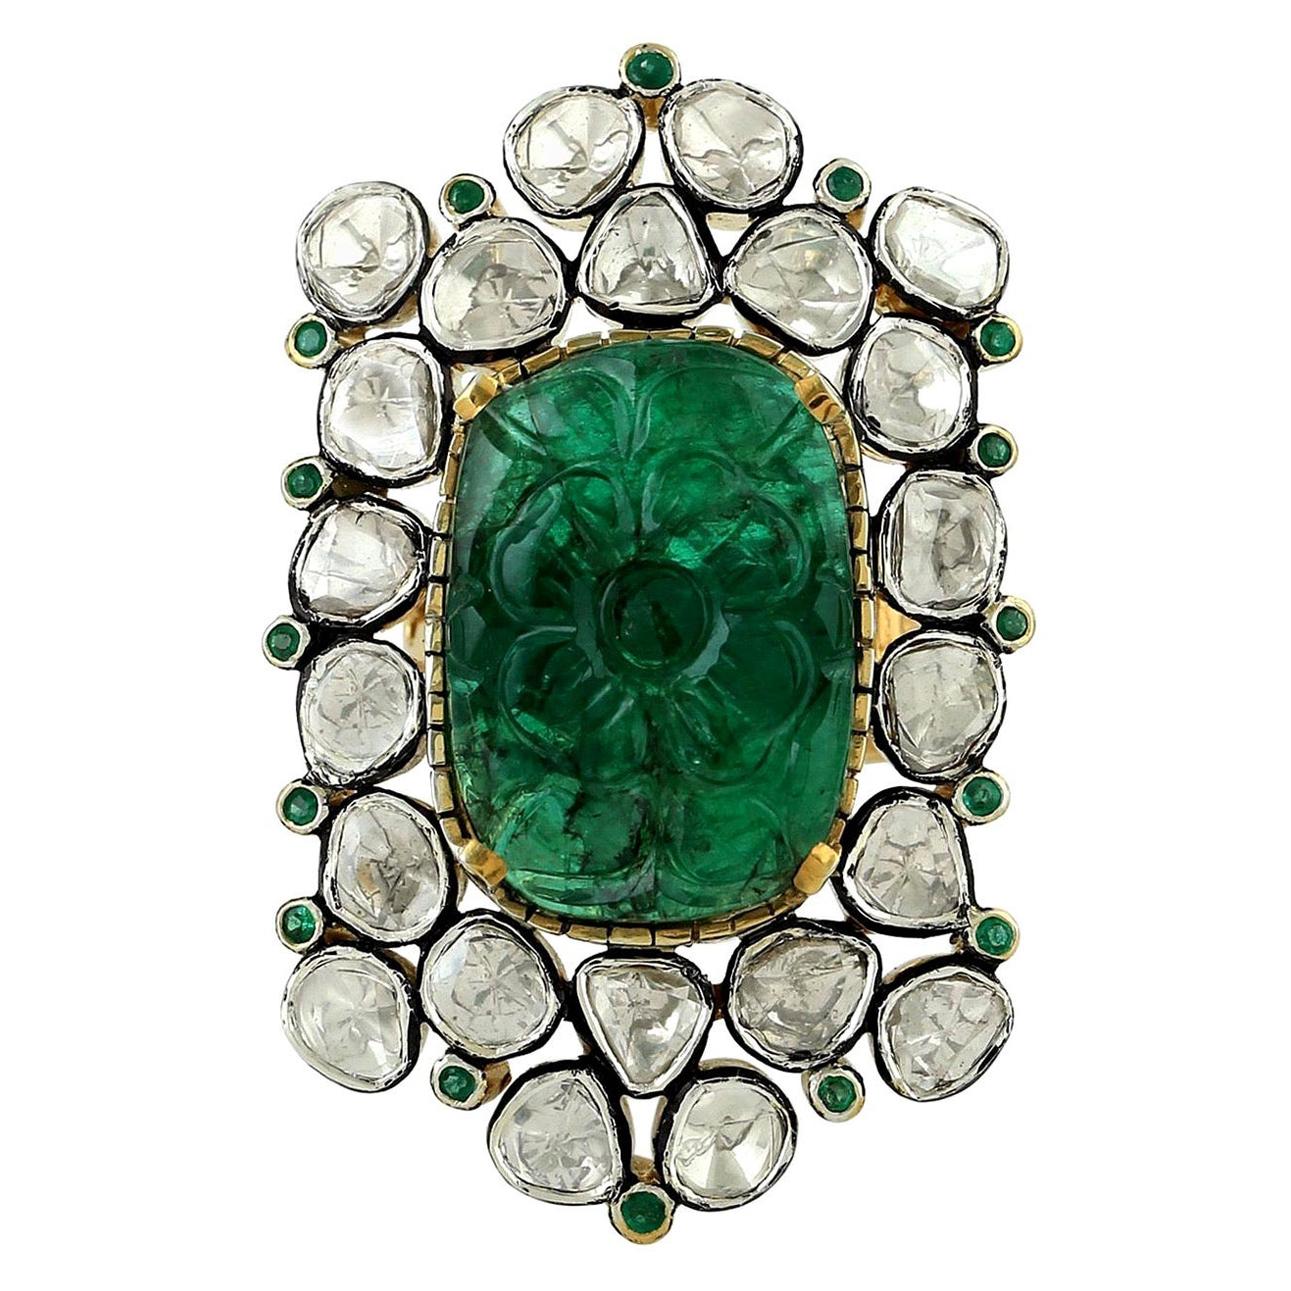 For Sale:  9.12 Carat Carved Emerald Rose Cut Diamond Cocktail Ring